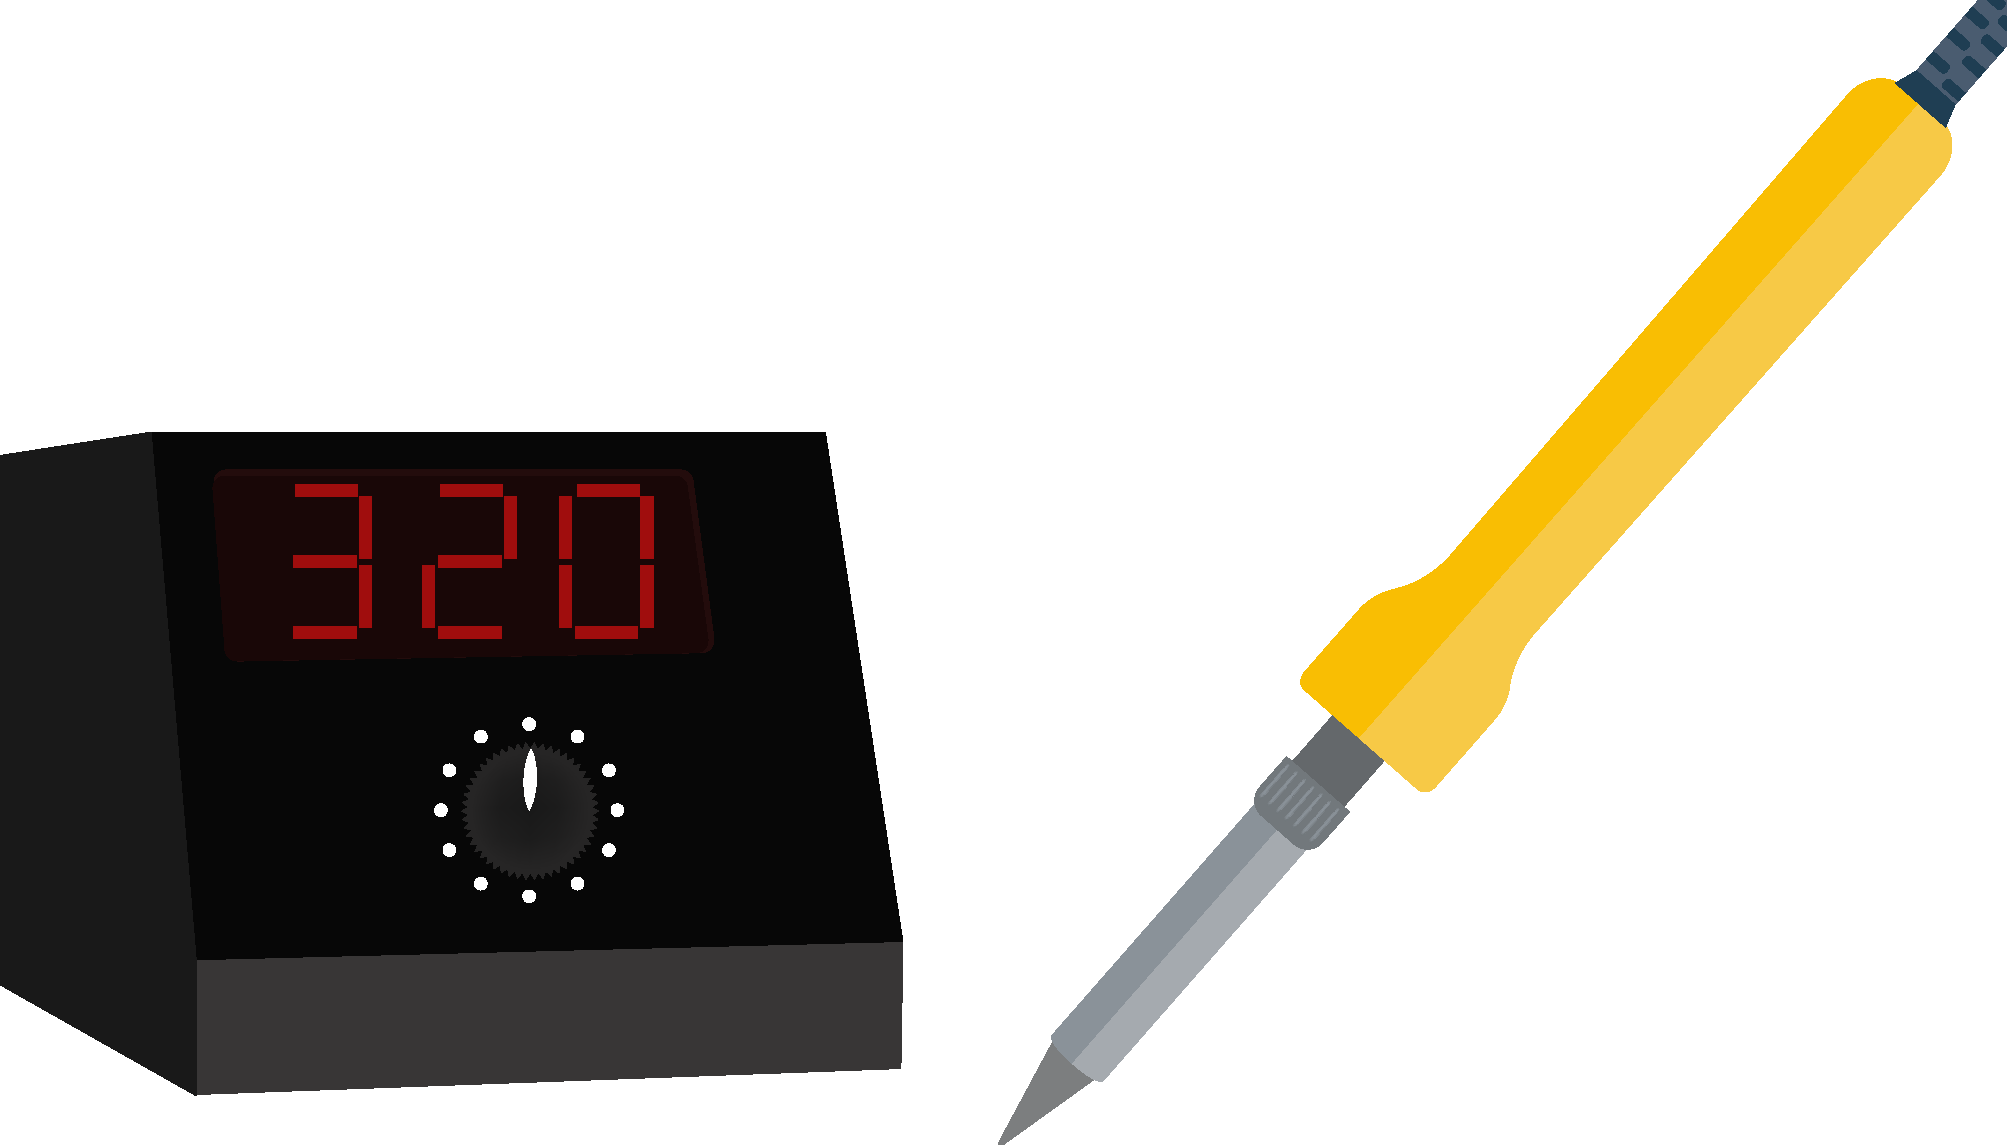 Soldering Guide: Heat-up the soldering iron to about 320°C